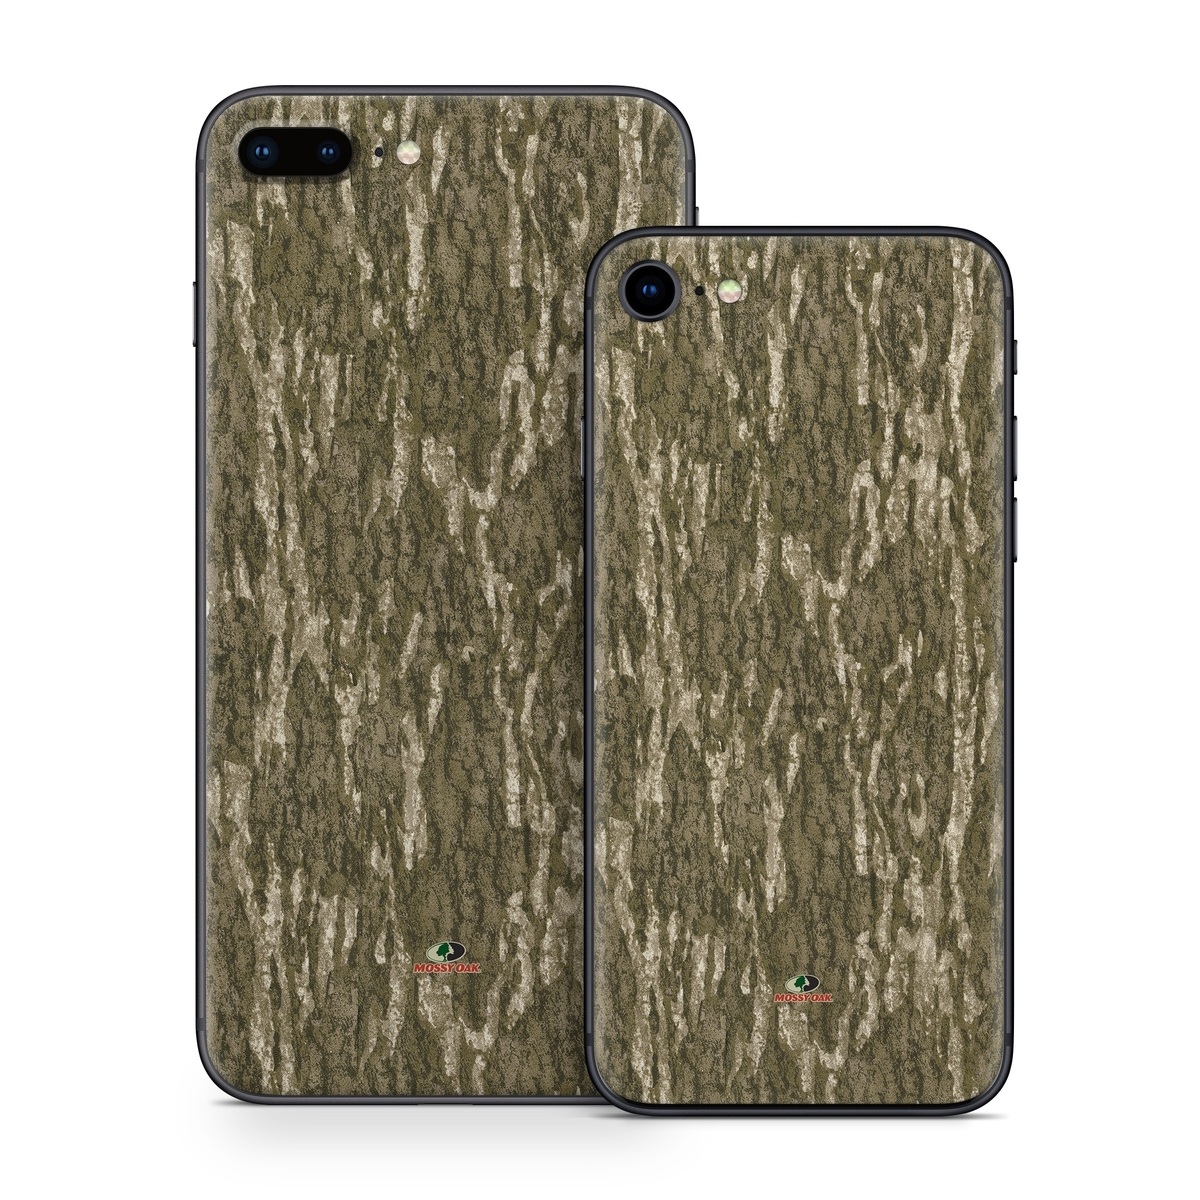 iPhone 8 Skin design of Grass, Brown, Grass family, Plant, Soil with black, red, gray colors